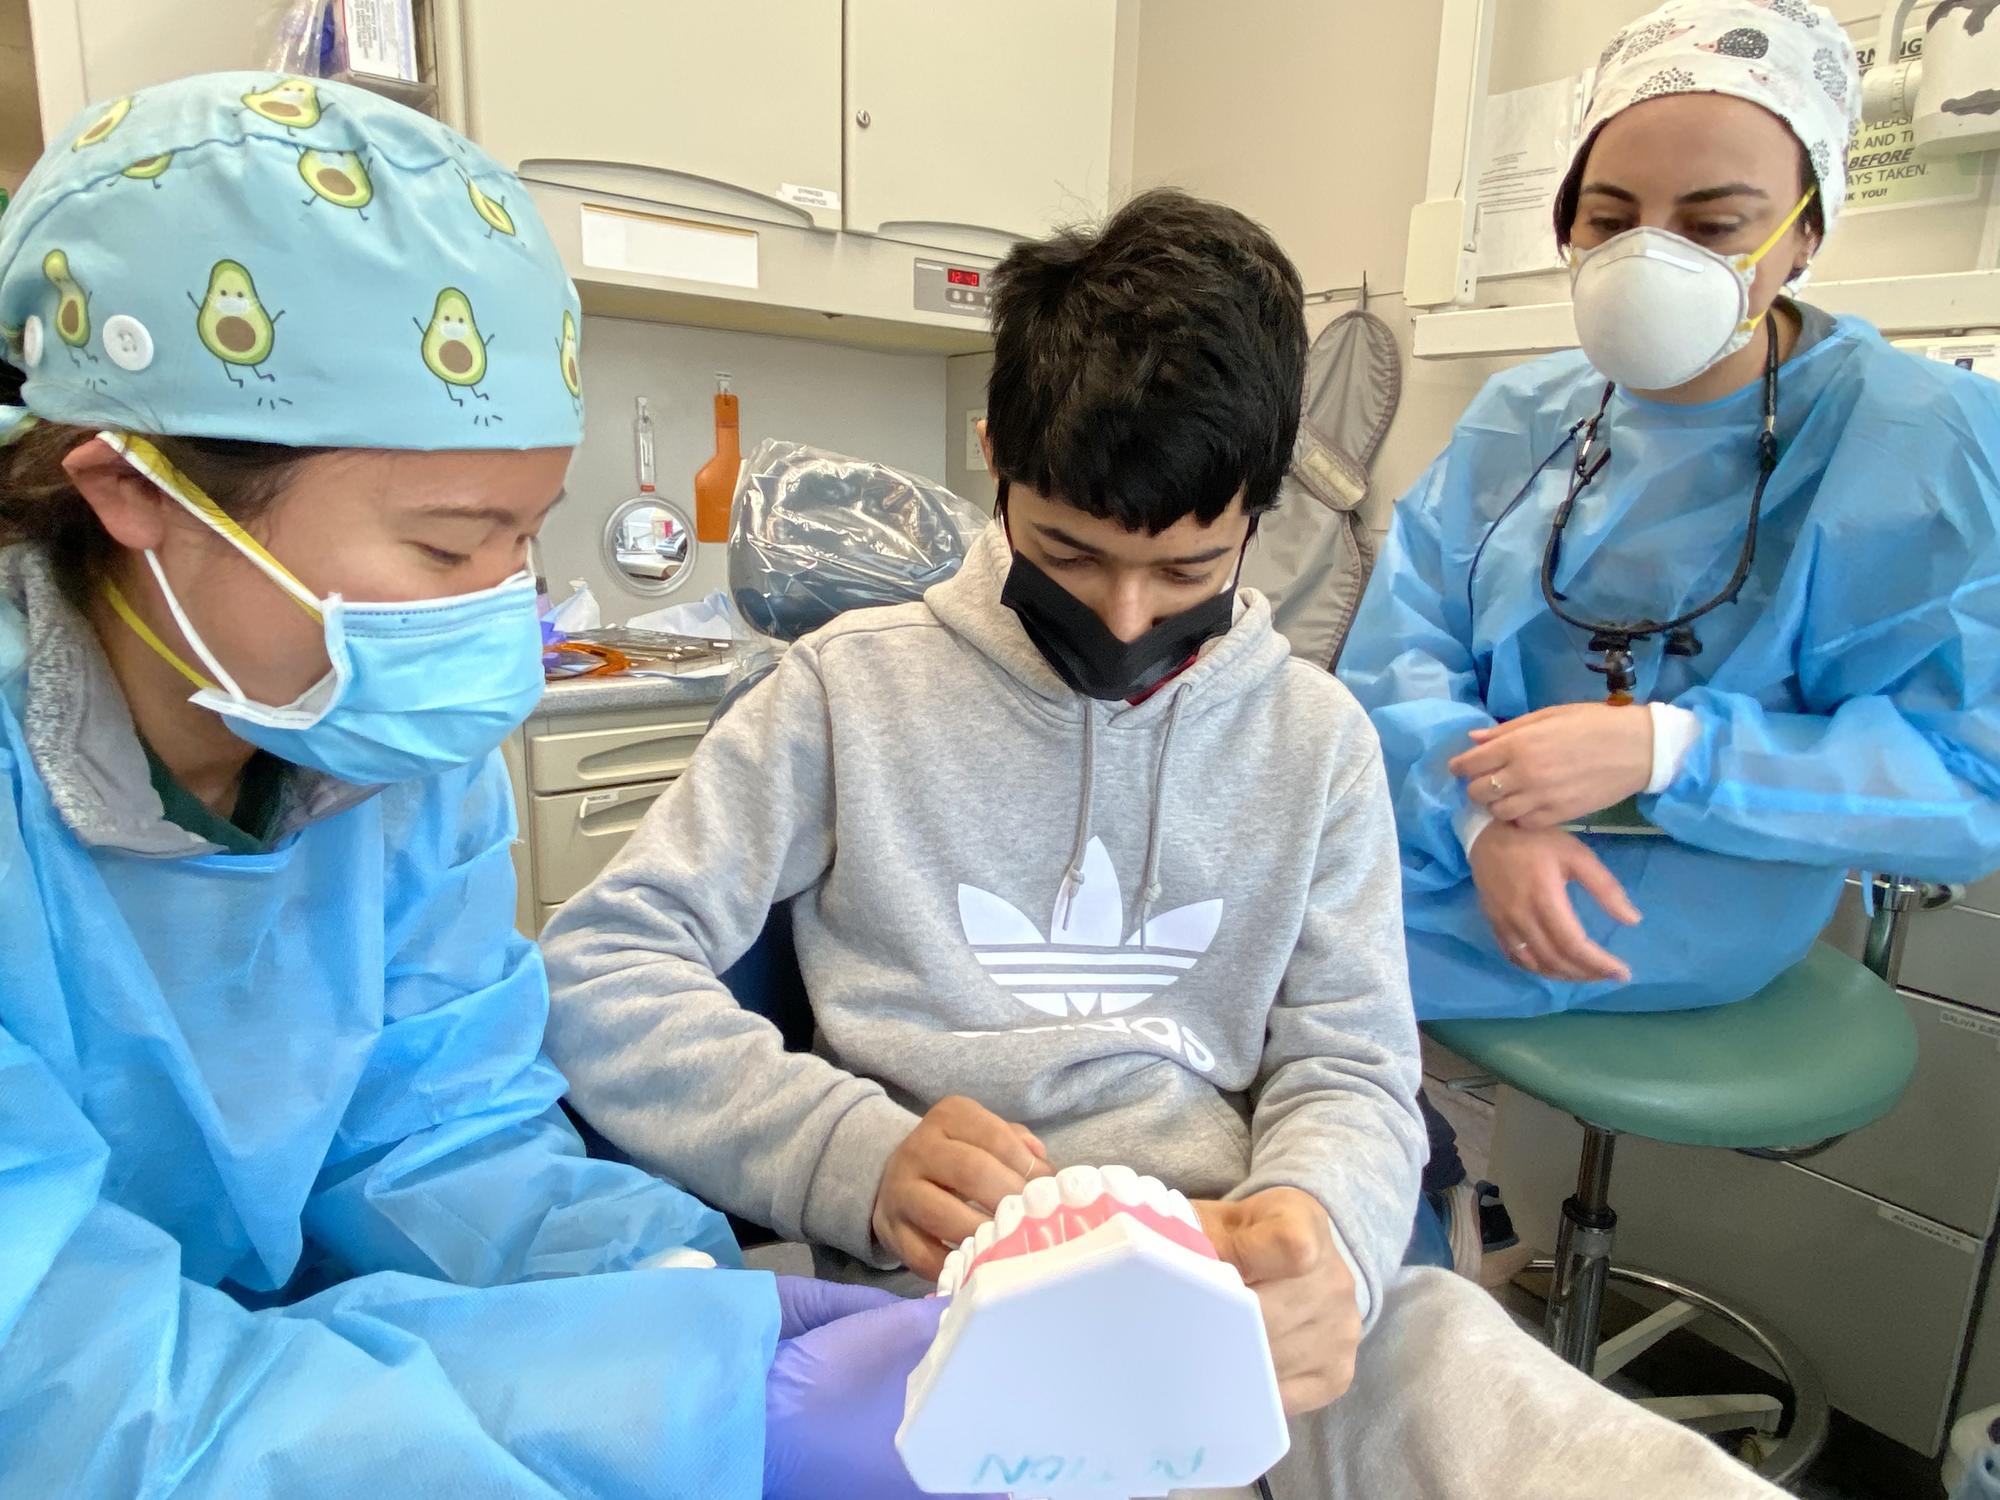 Two dentists showing young patient how to properly brush their teeth